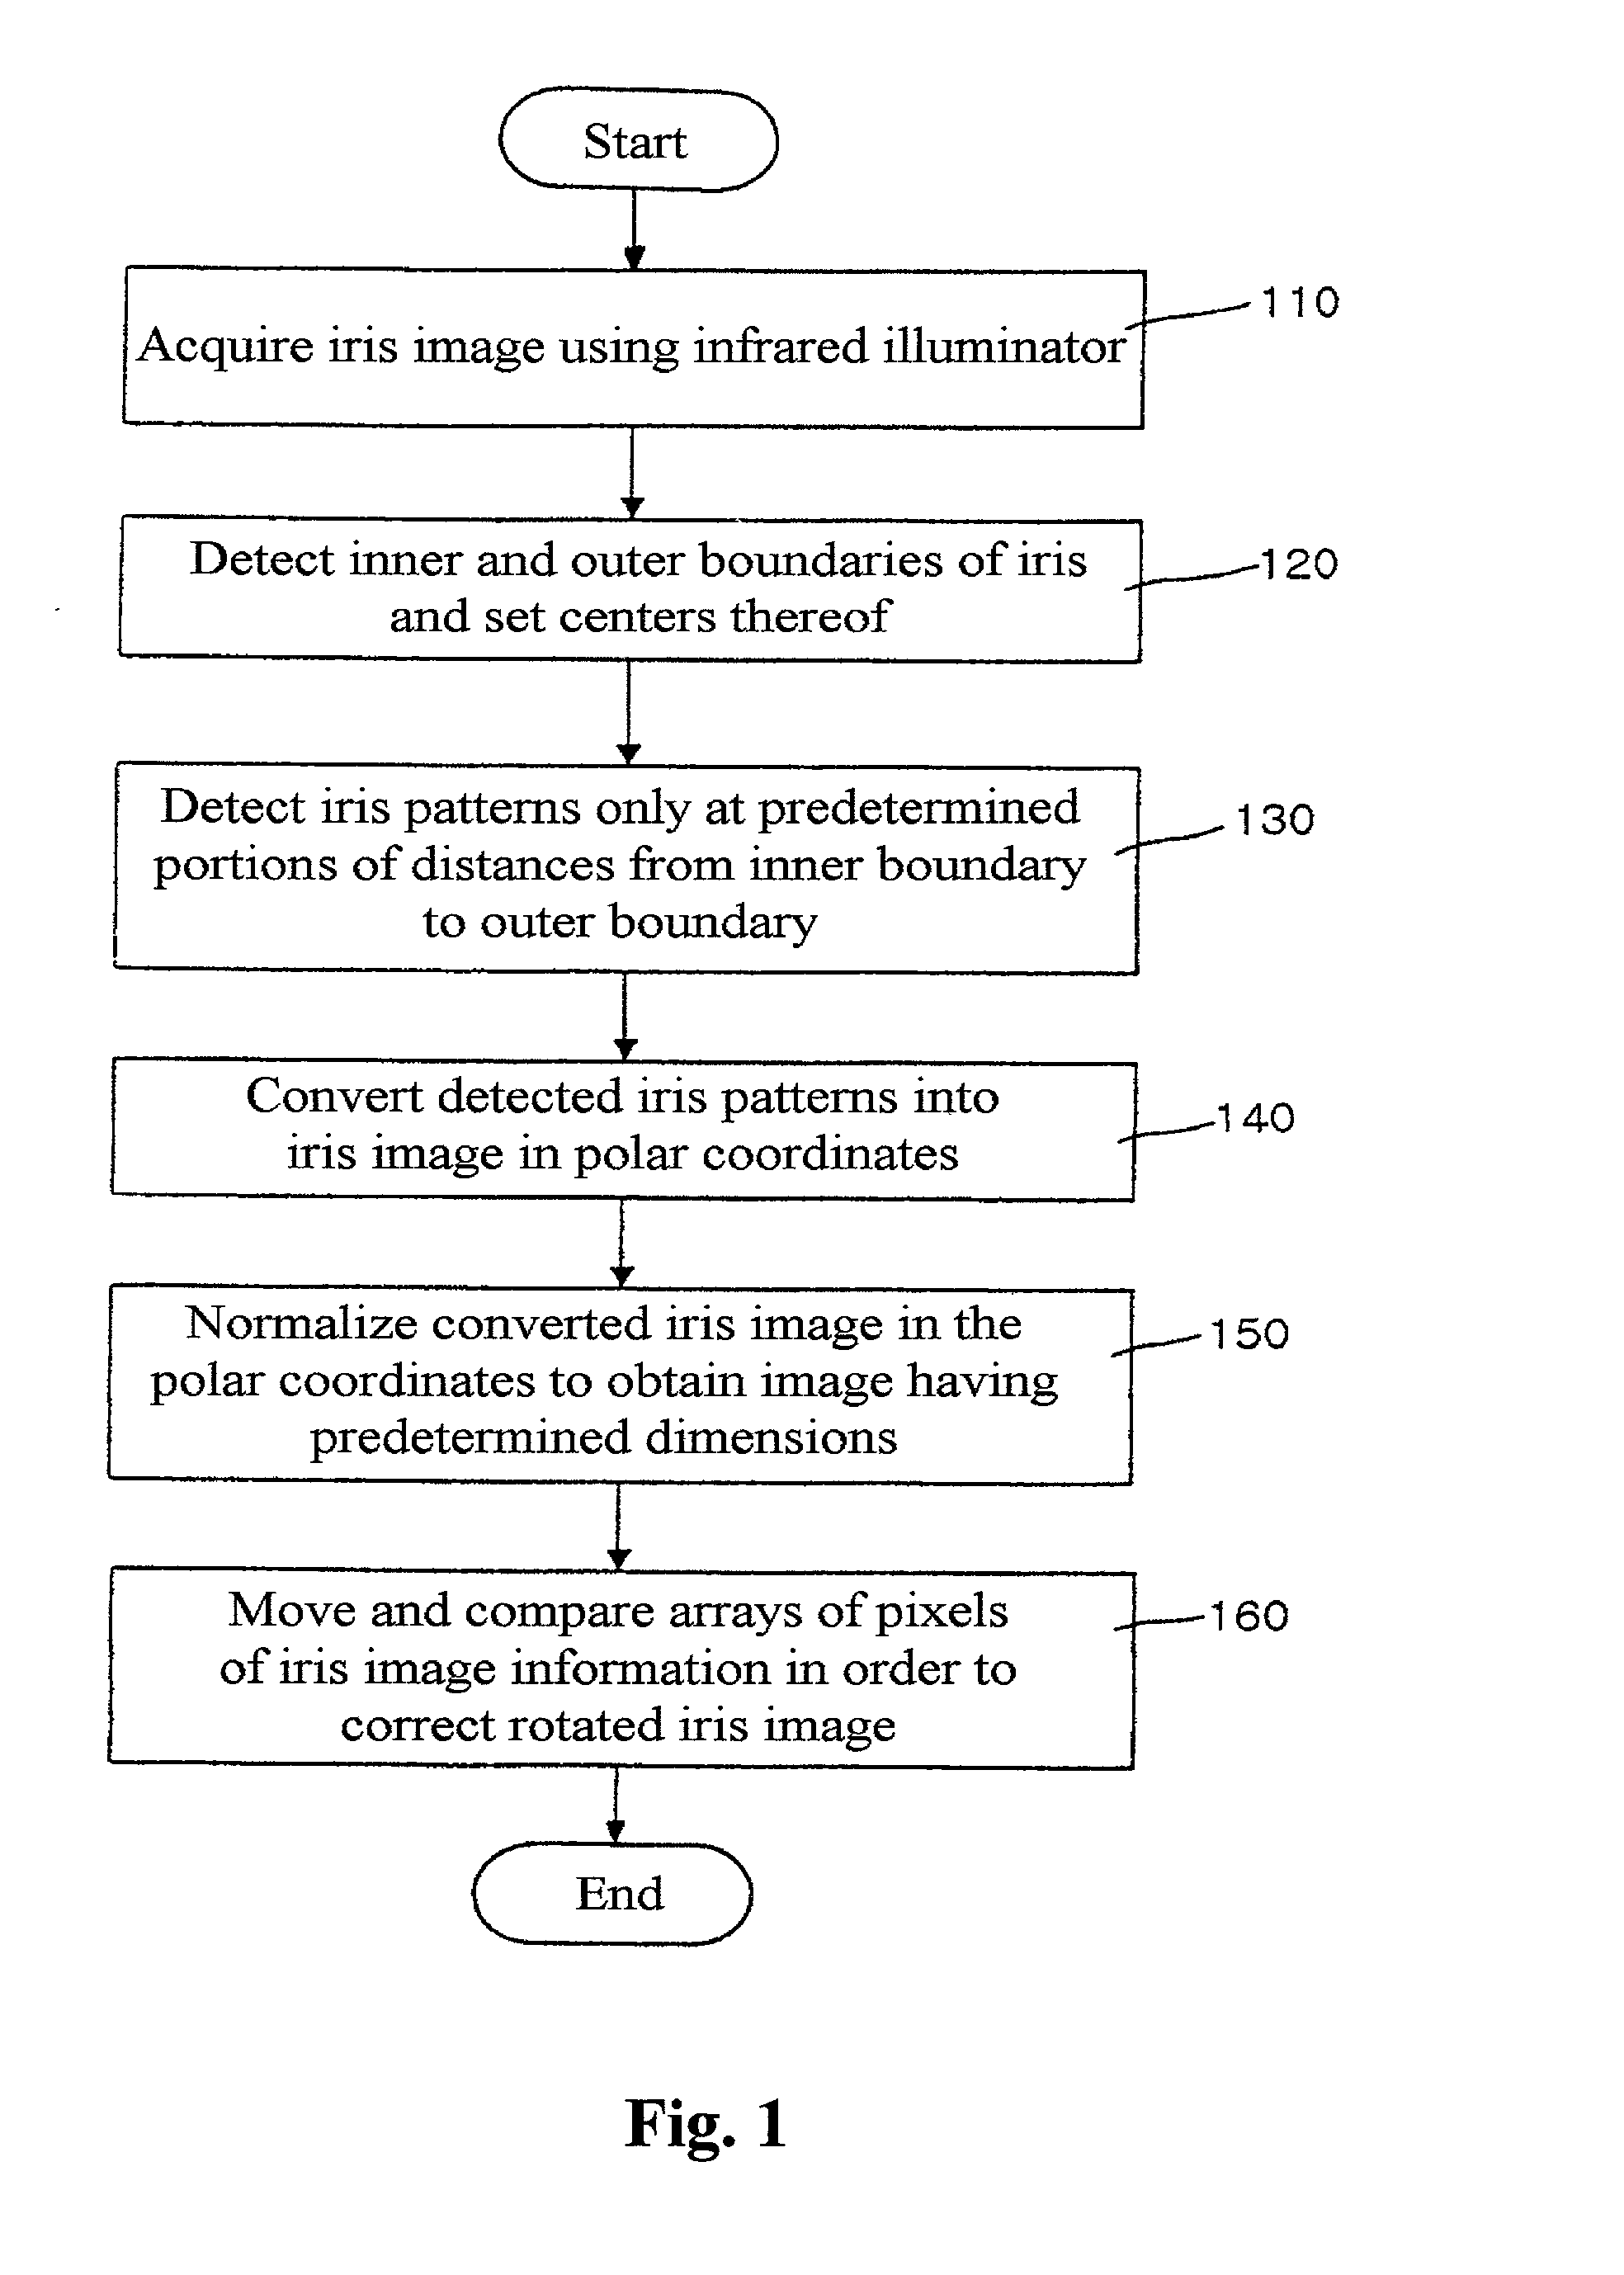 Non-contact type human iris recognition method for correcting a rotated iris image